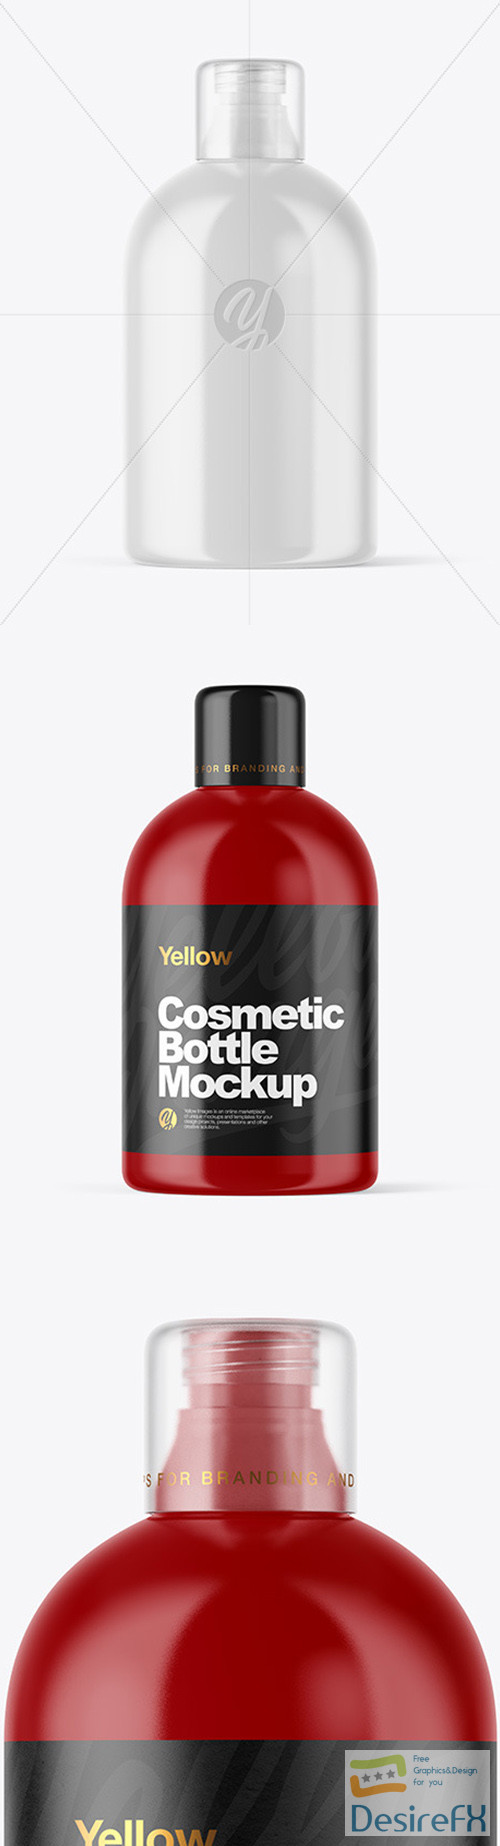 Download Download Glossy Cosmetic Bottle Mockup 51100 TIF ...